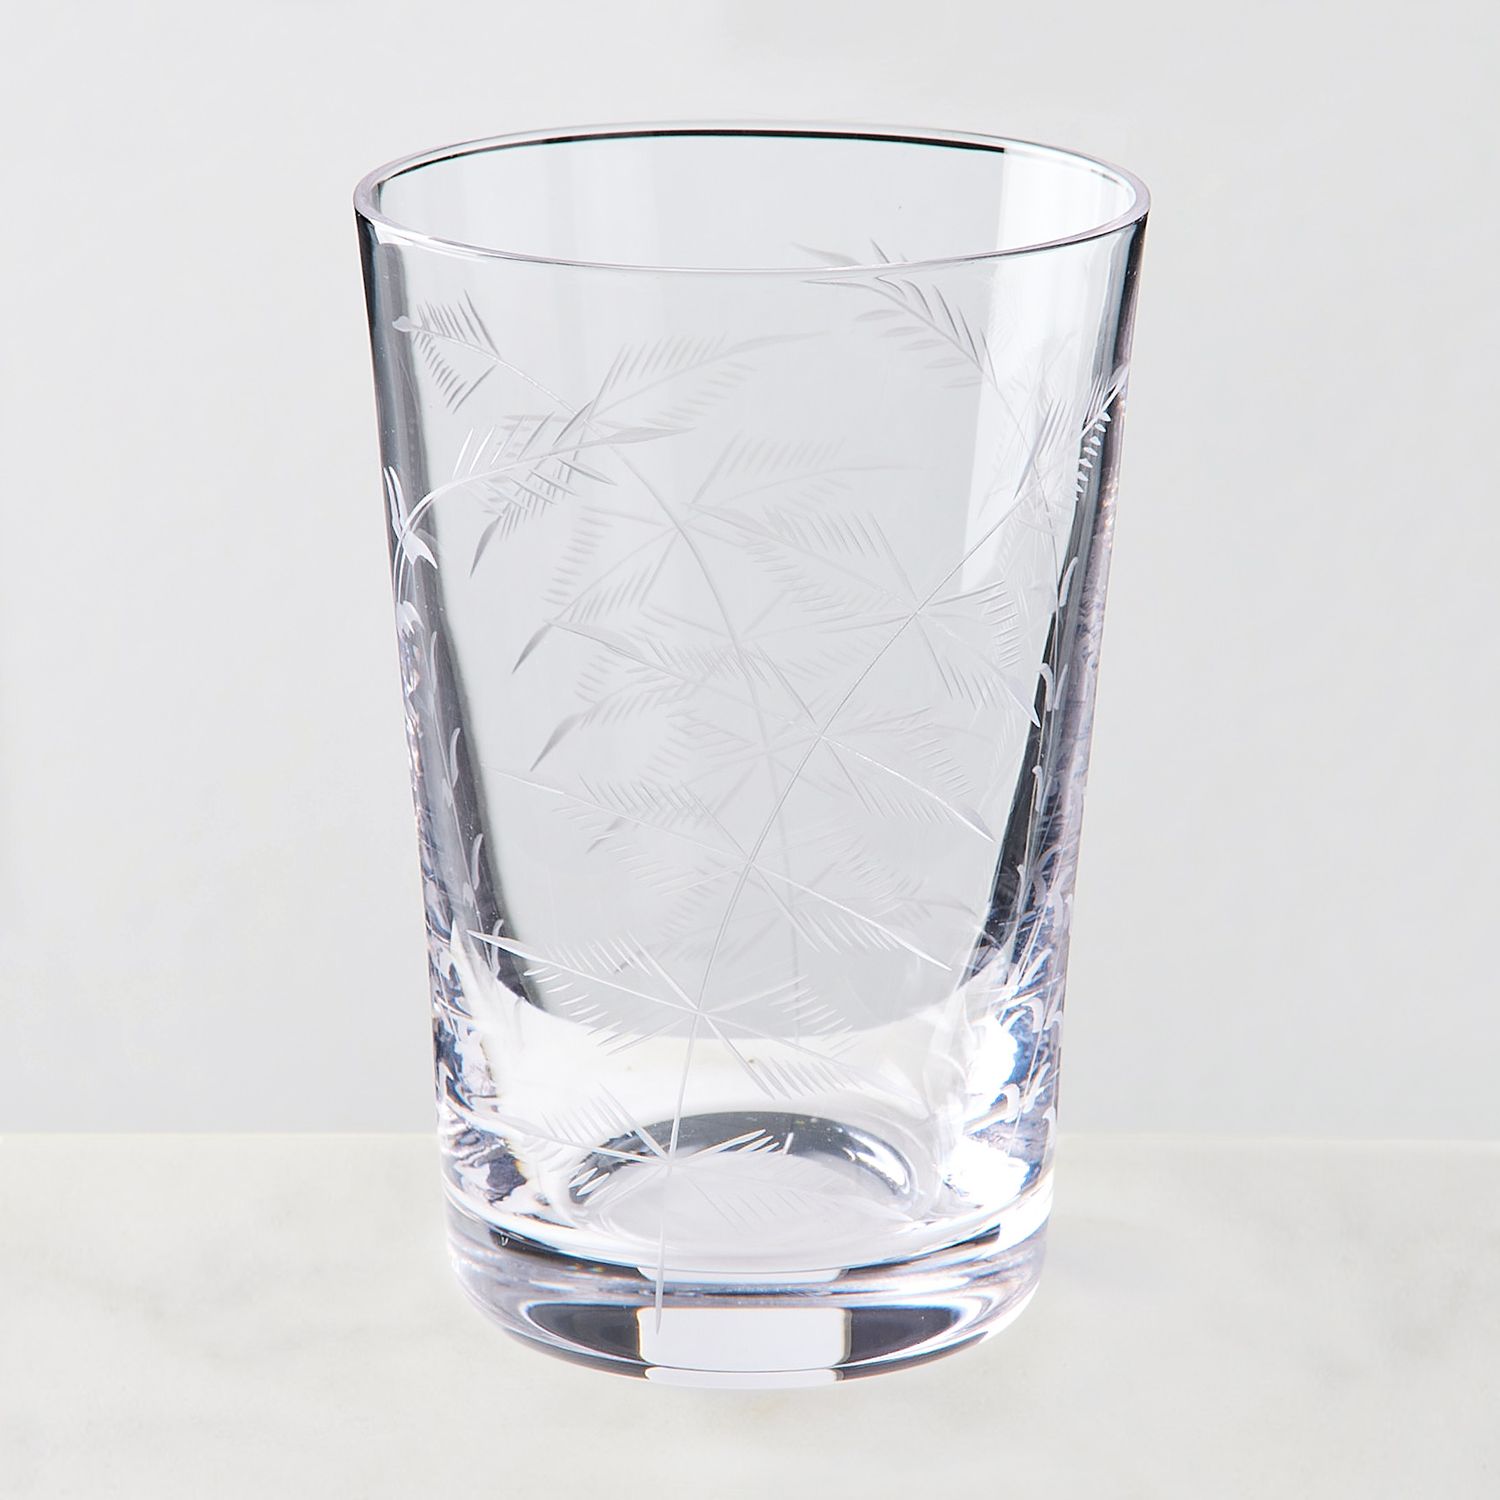 Try This: Twice Etched, Twice Painted Tumblers